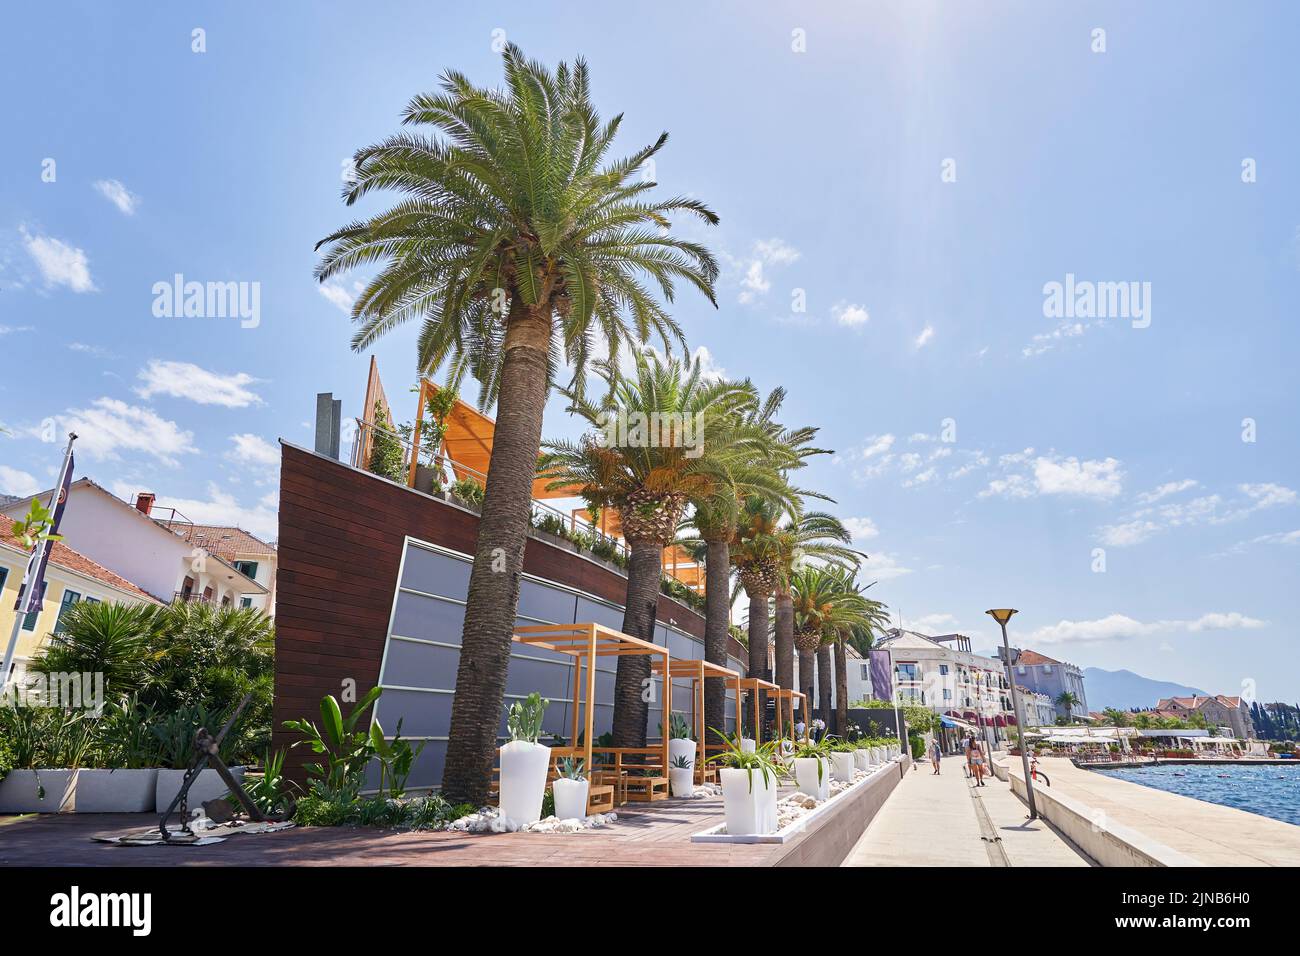 TIVAT, MONTENEGRO - JULY 17, 2021: Building of Casino and bar of Salon Prive Stock Photo